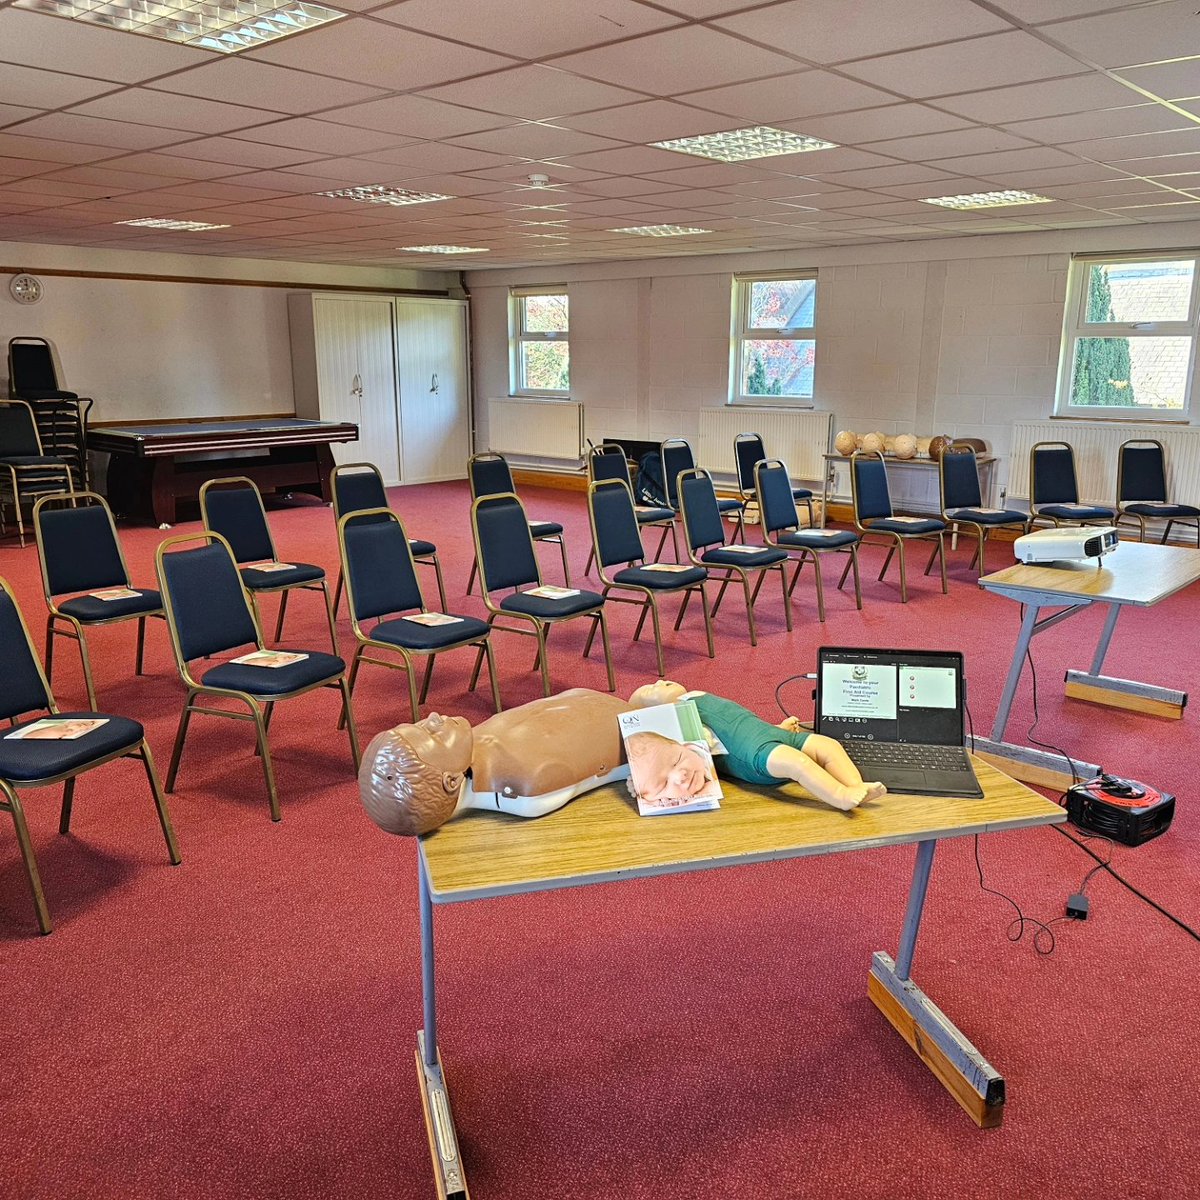 Today, we start another open 12hr Paediatric First Aid Course. Today's learners are mainly School based. We are pleased to see many School sending their staff on the full 12-hour course.
#FirstAidTraining #Schools #Ofsted #EasyAsABC 
abcmedicalservices.co.uk